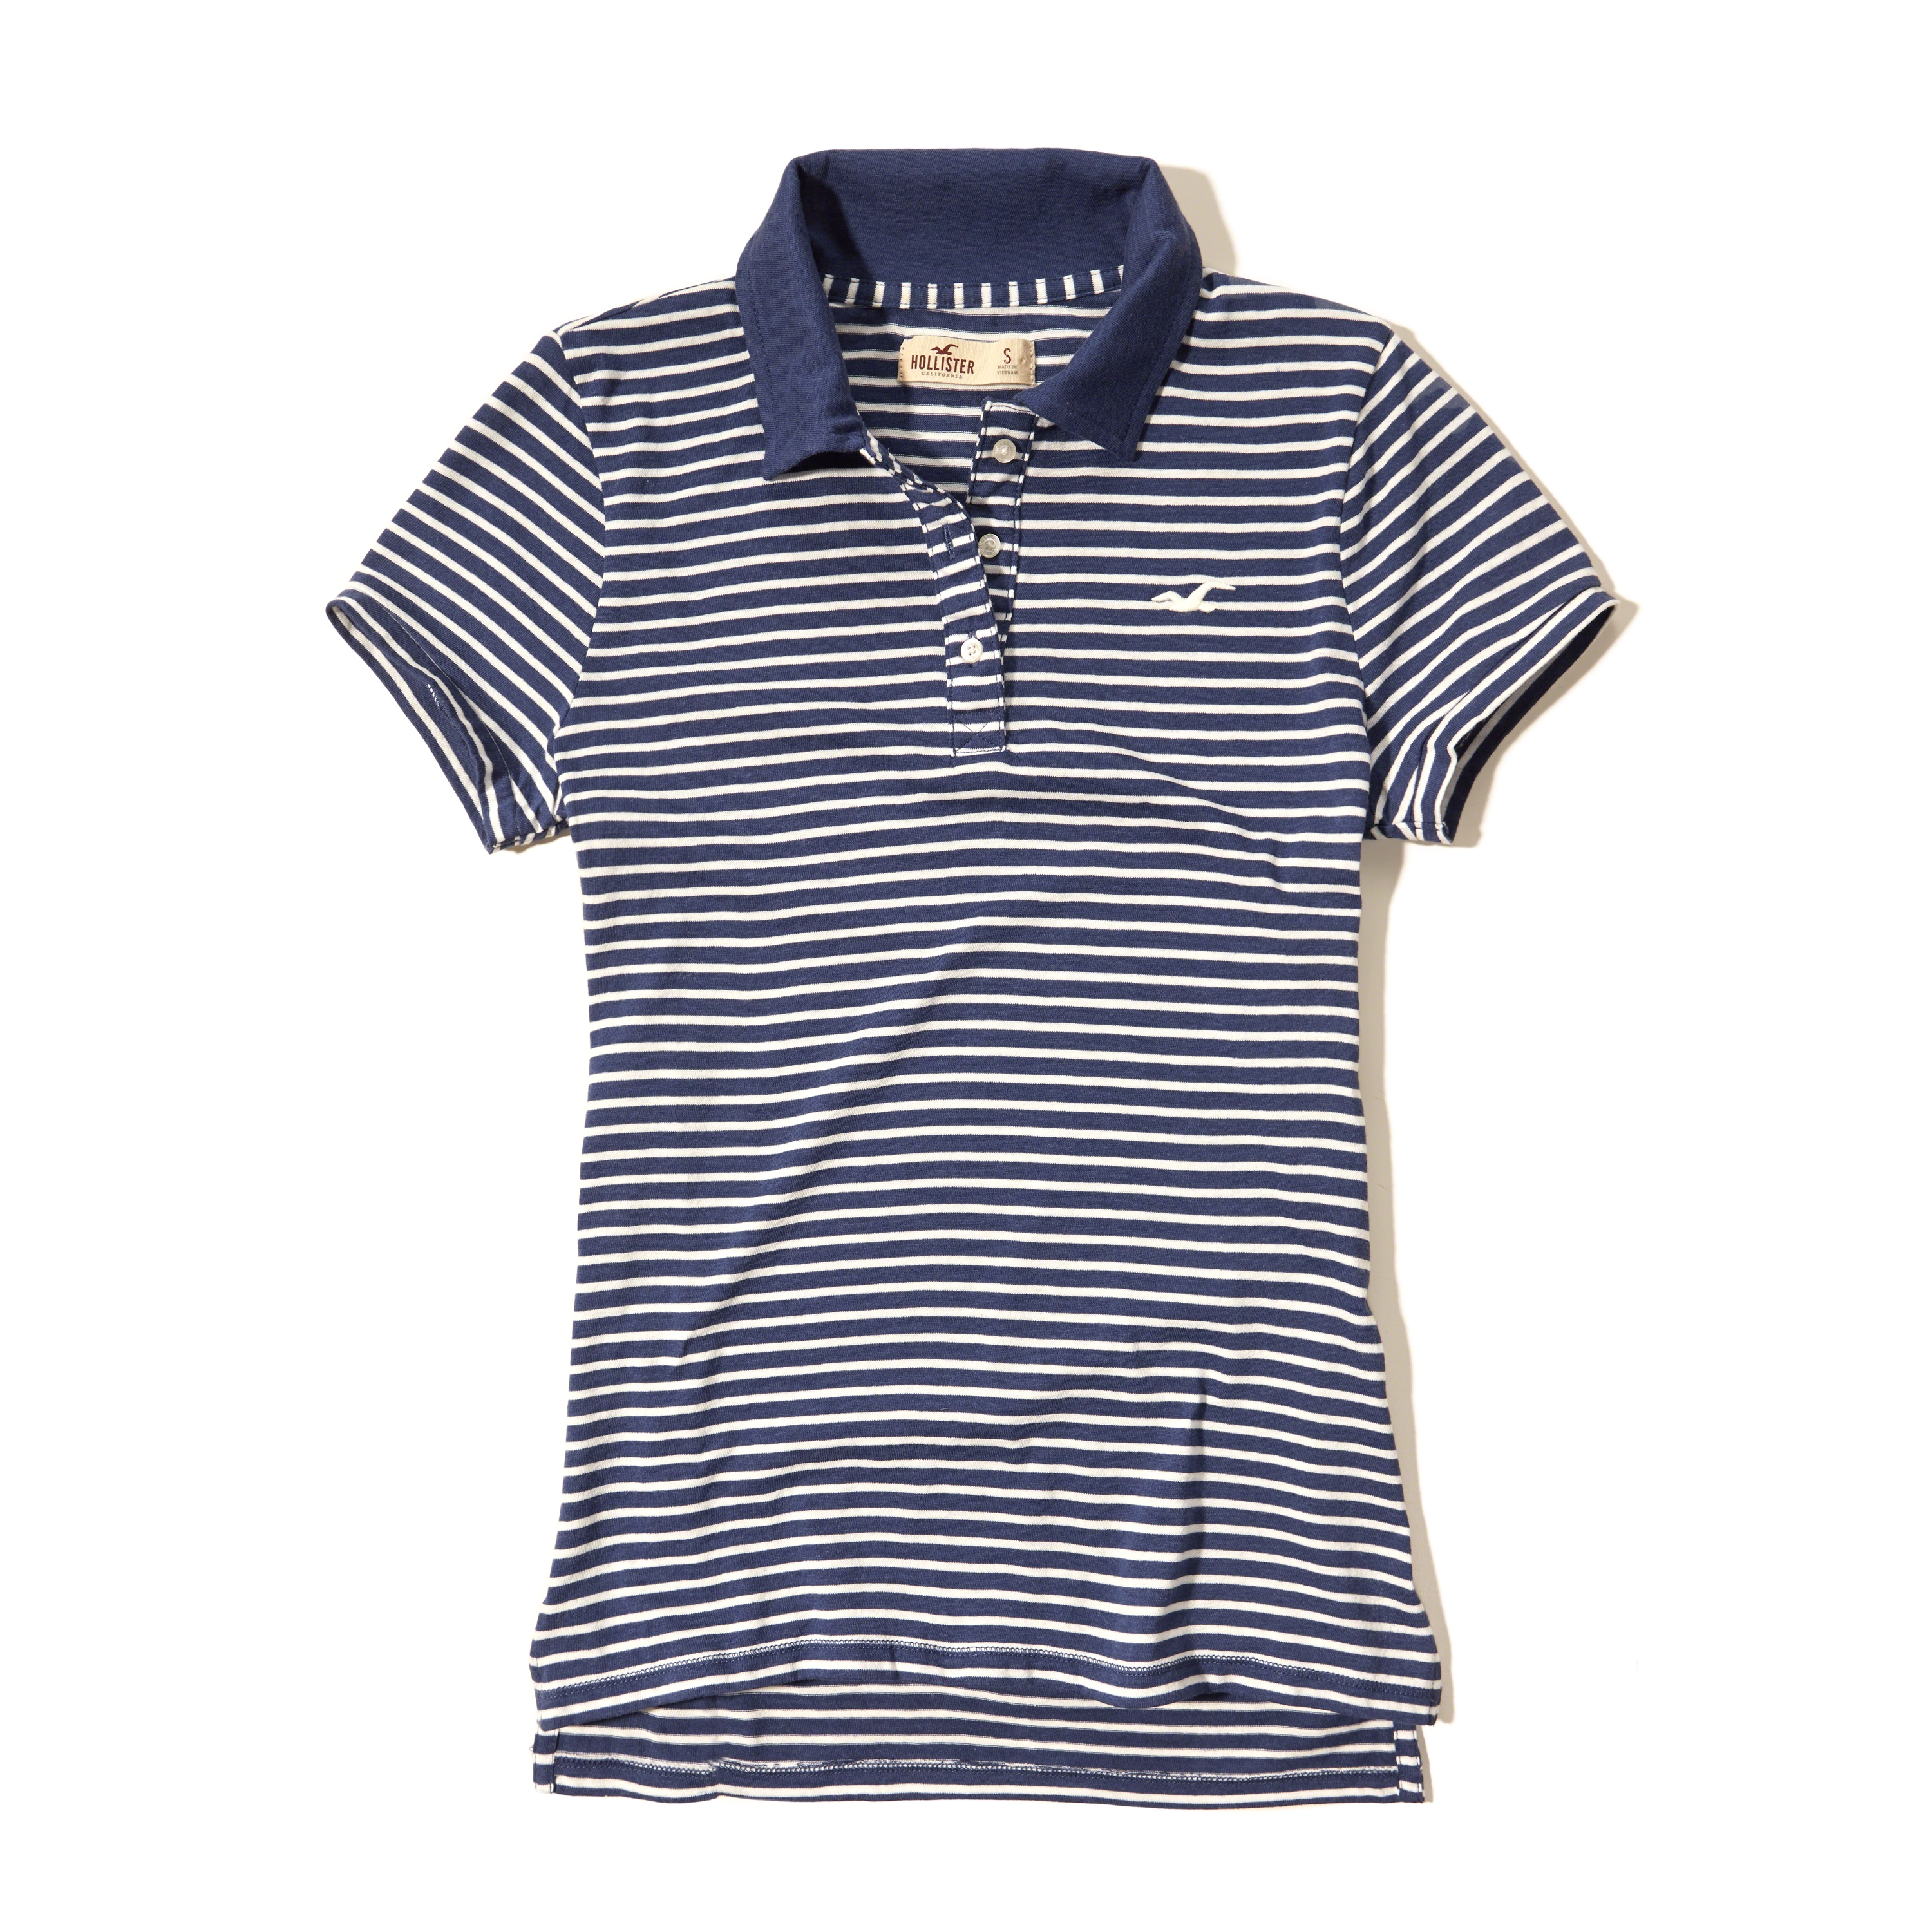 Lyst - Hollister Stripe Icon Polo in Blue